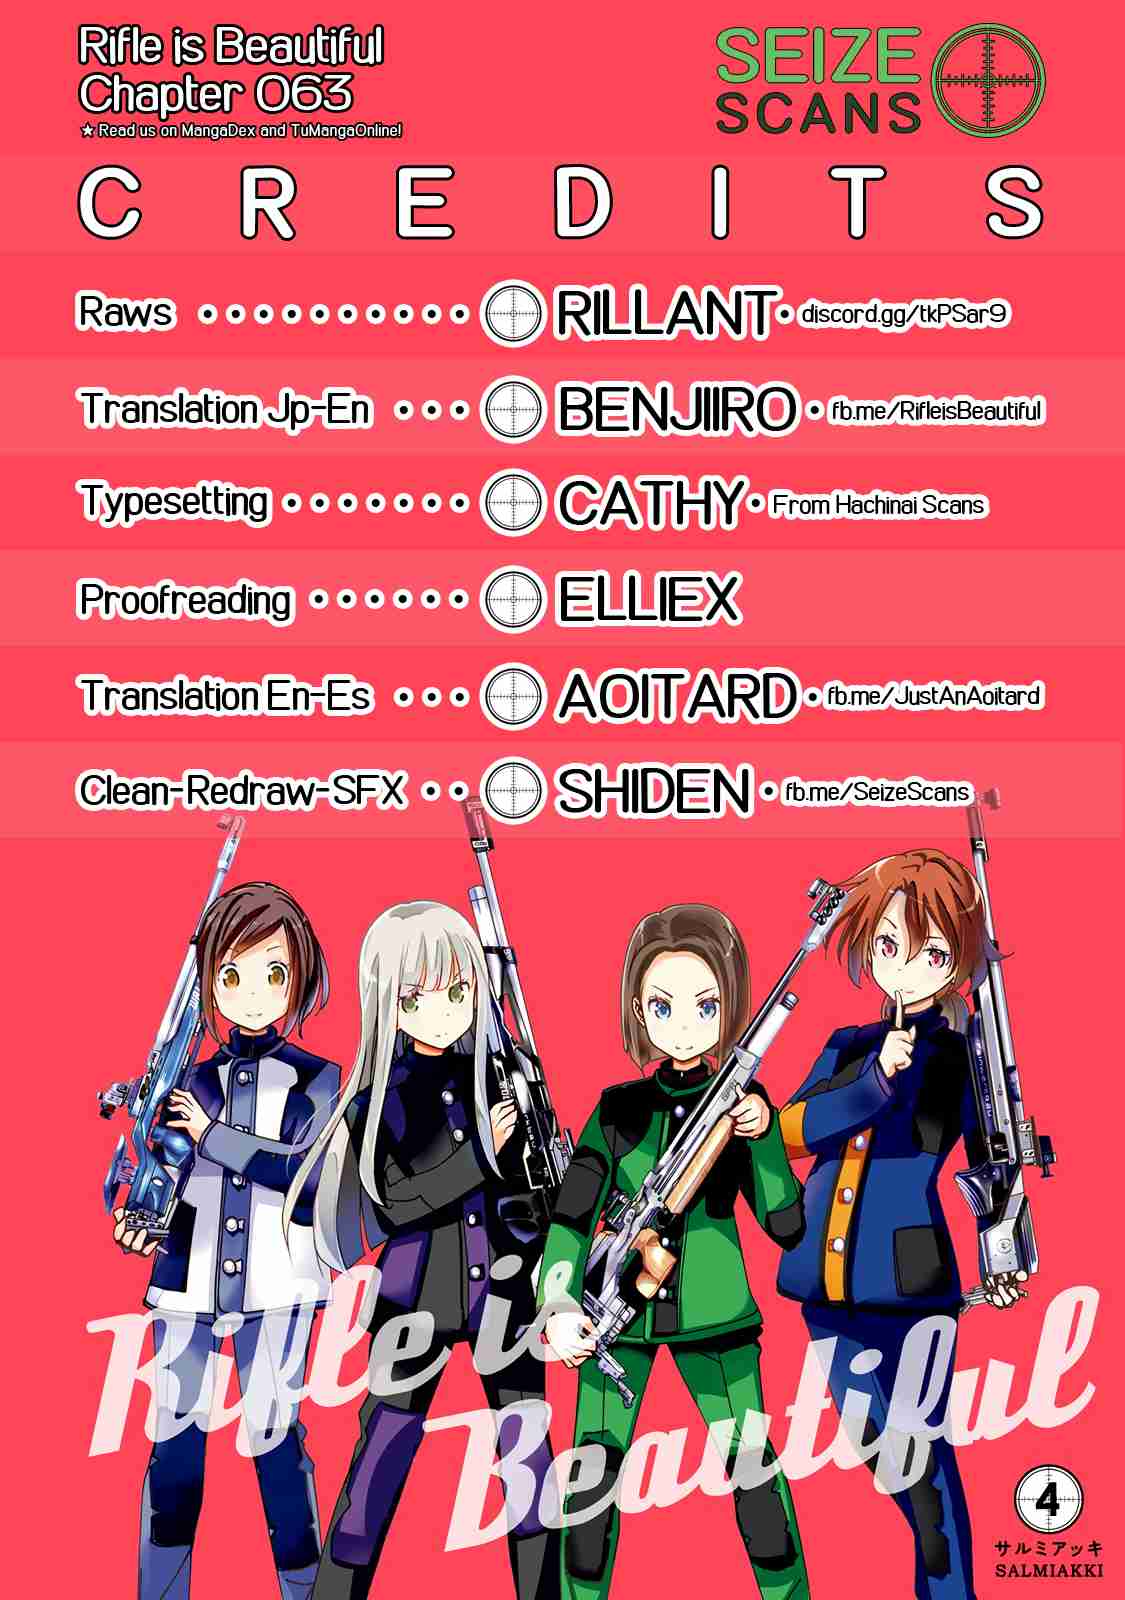 Rifle Is Beautiful Vol. 4 Ch. 63 Let's be kind to each other this year too